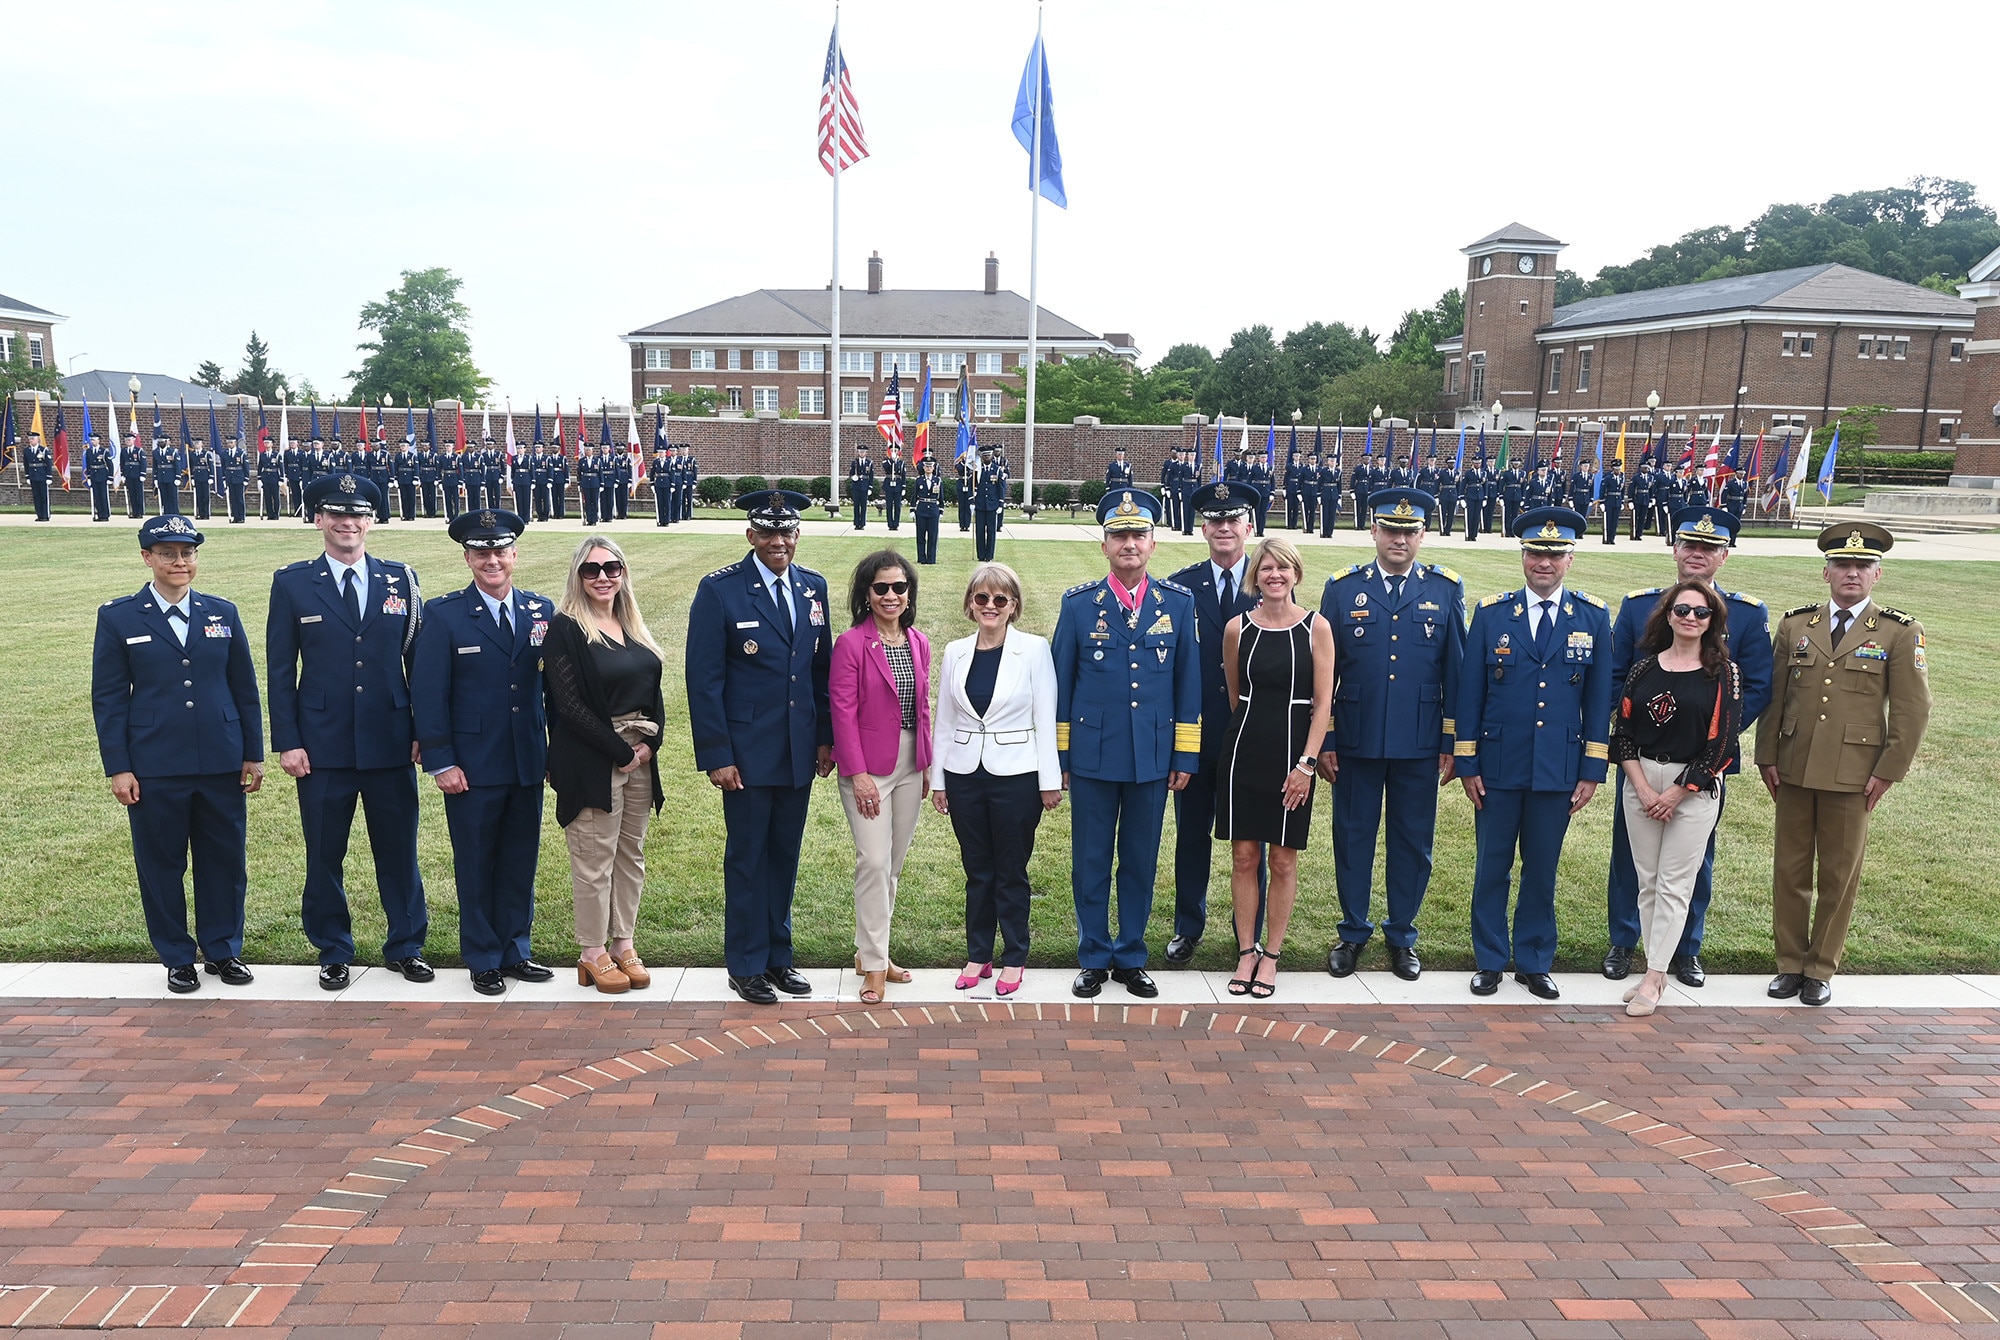 Air Force Chief of Staff Gen. CQ Brown, Jr. hosts Chief of the Romanian Air Force Staff Lt. Gen. Viorel Pană during a full honors arrival ceremony at Joint Base Anacostia-Bolling, Washington, D.C., June 27, 2023.